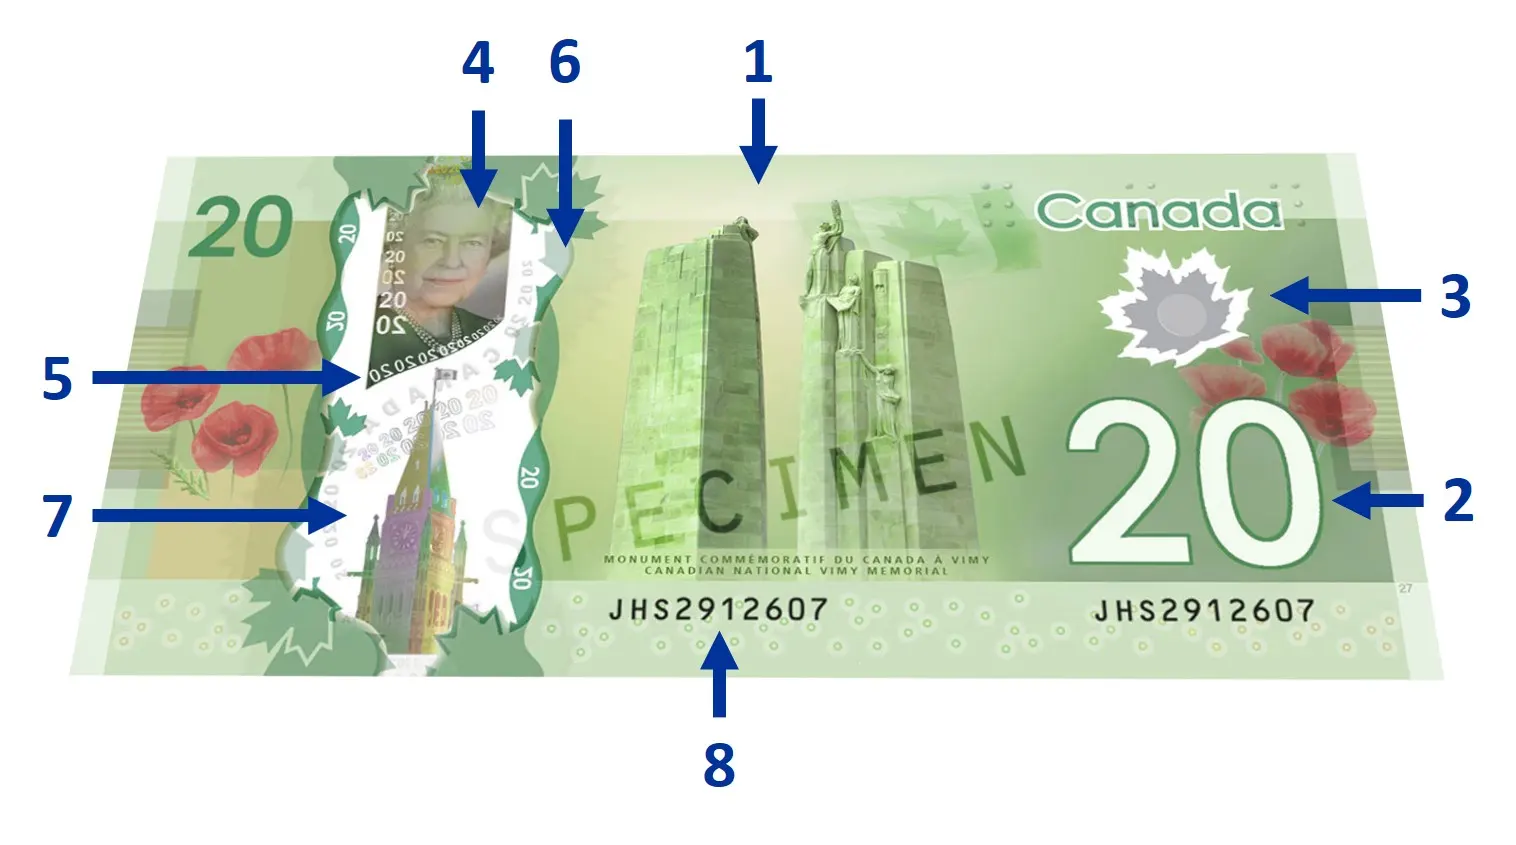 How to Tell if a $1 Bill is REAL or FAKE 